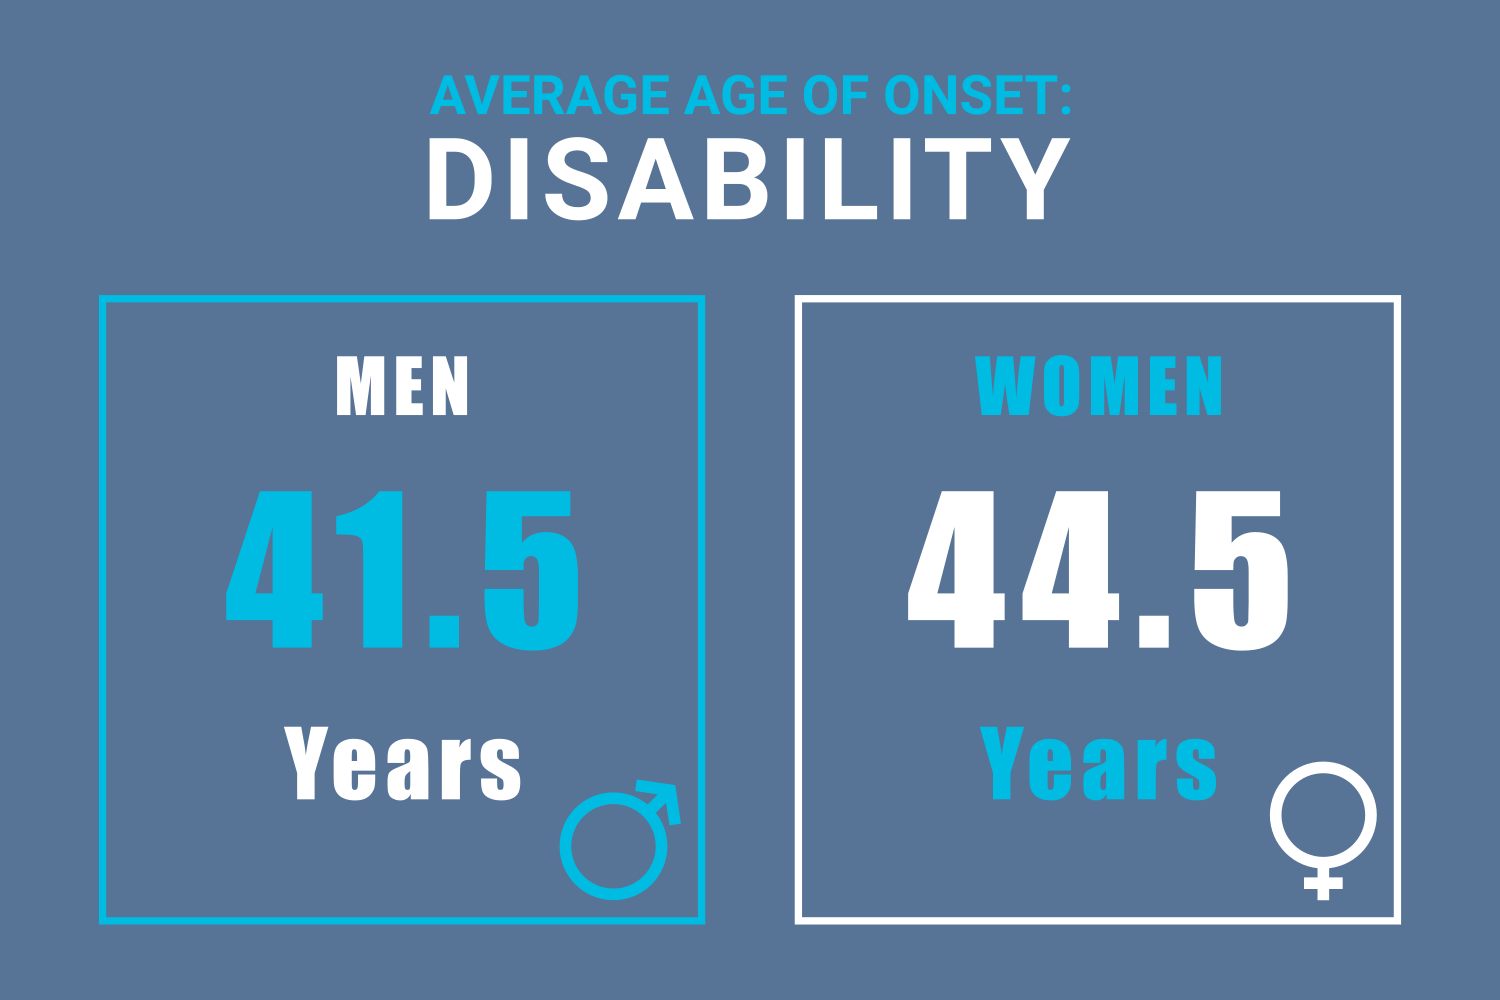 Average age of disability onset in men and women